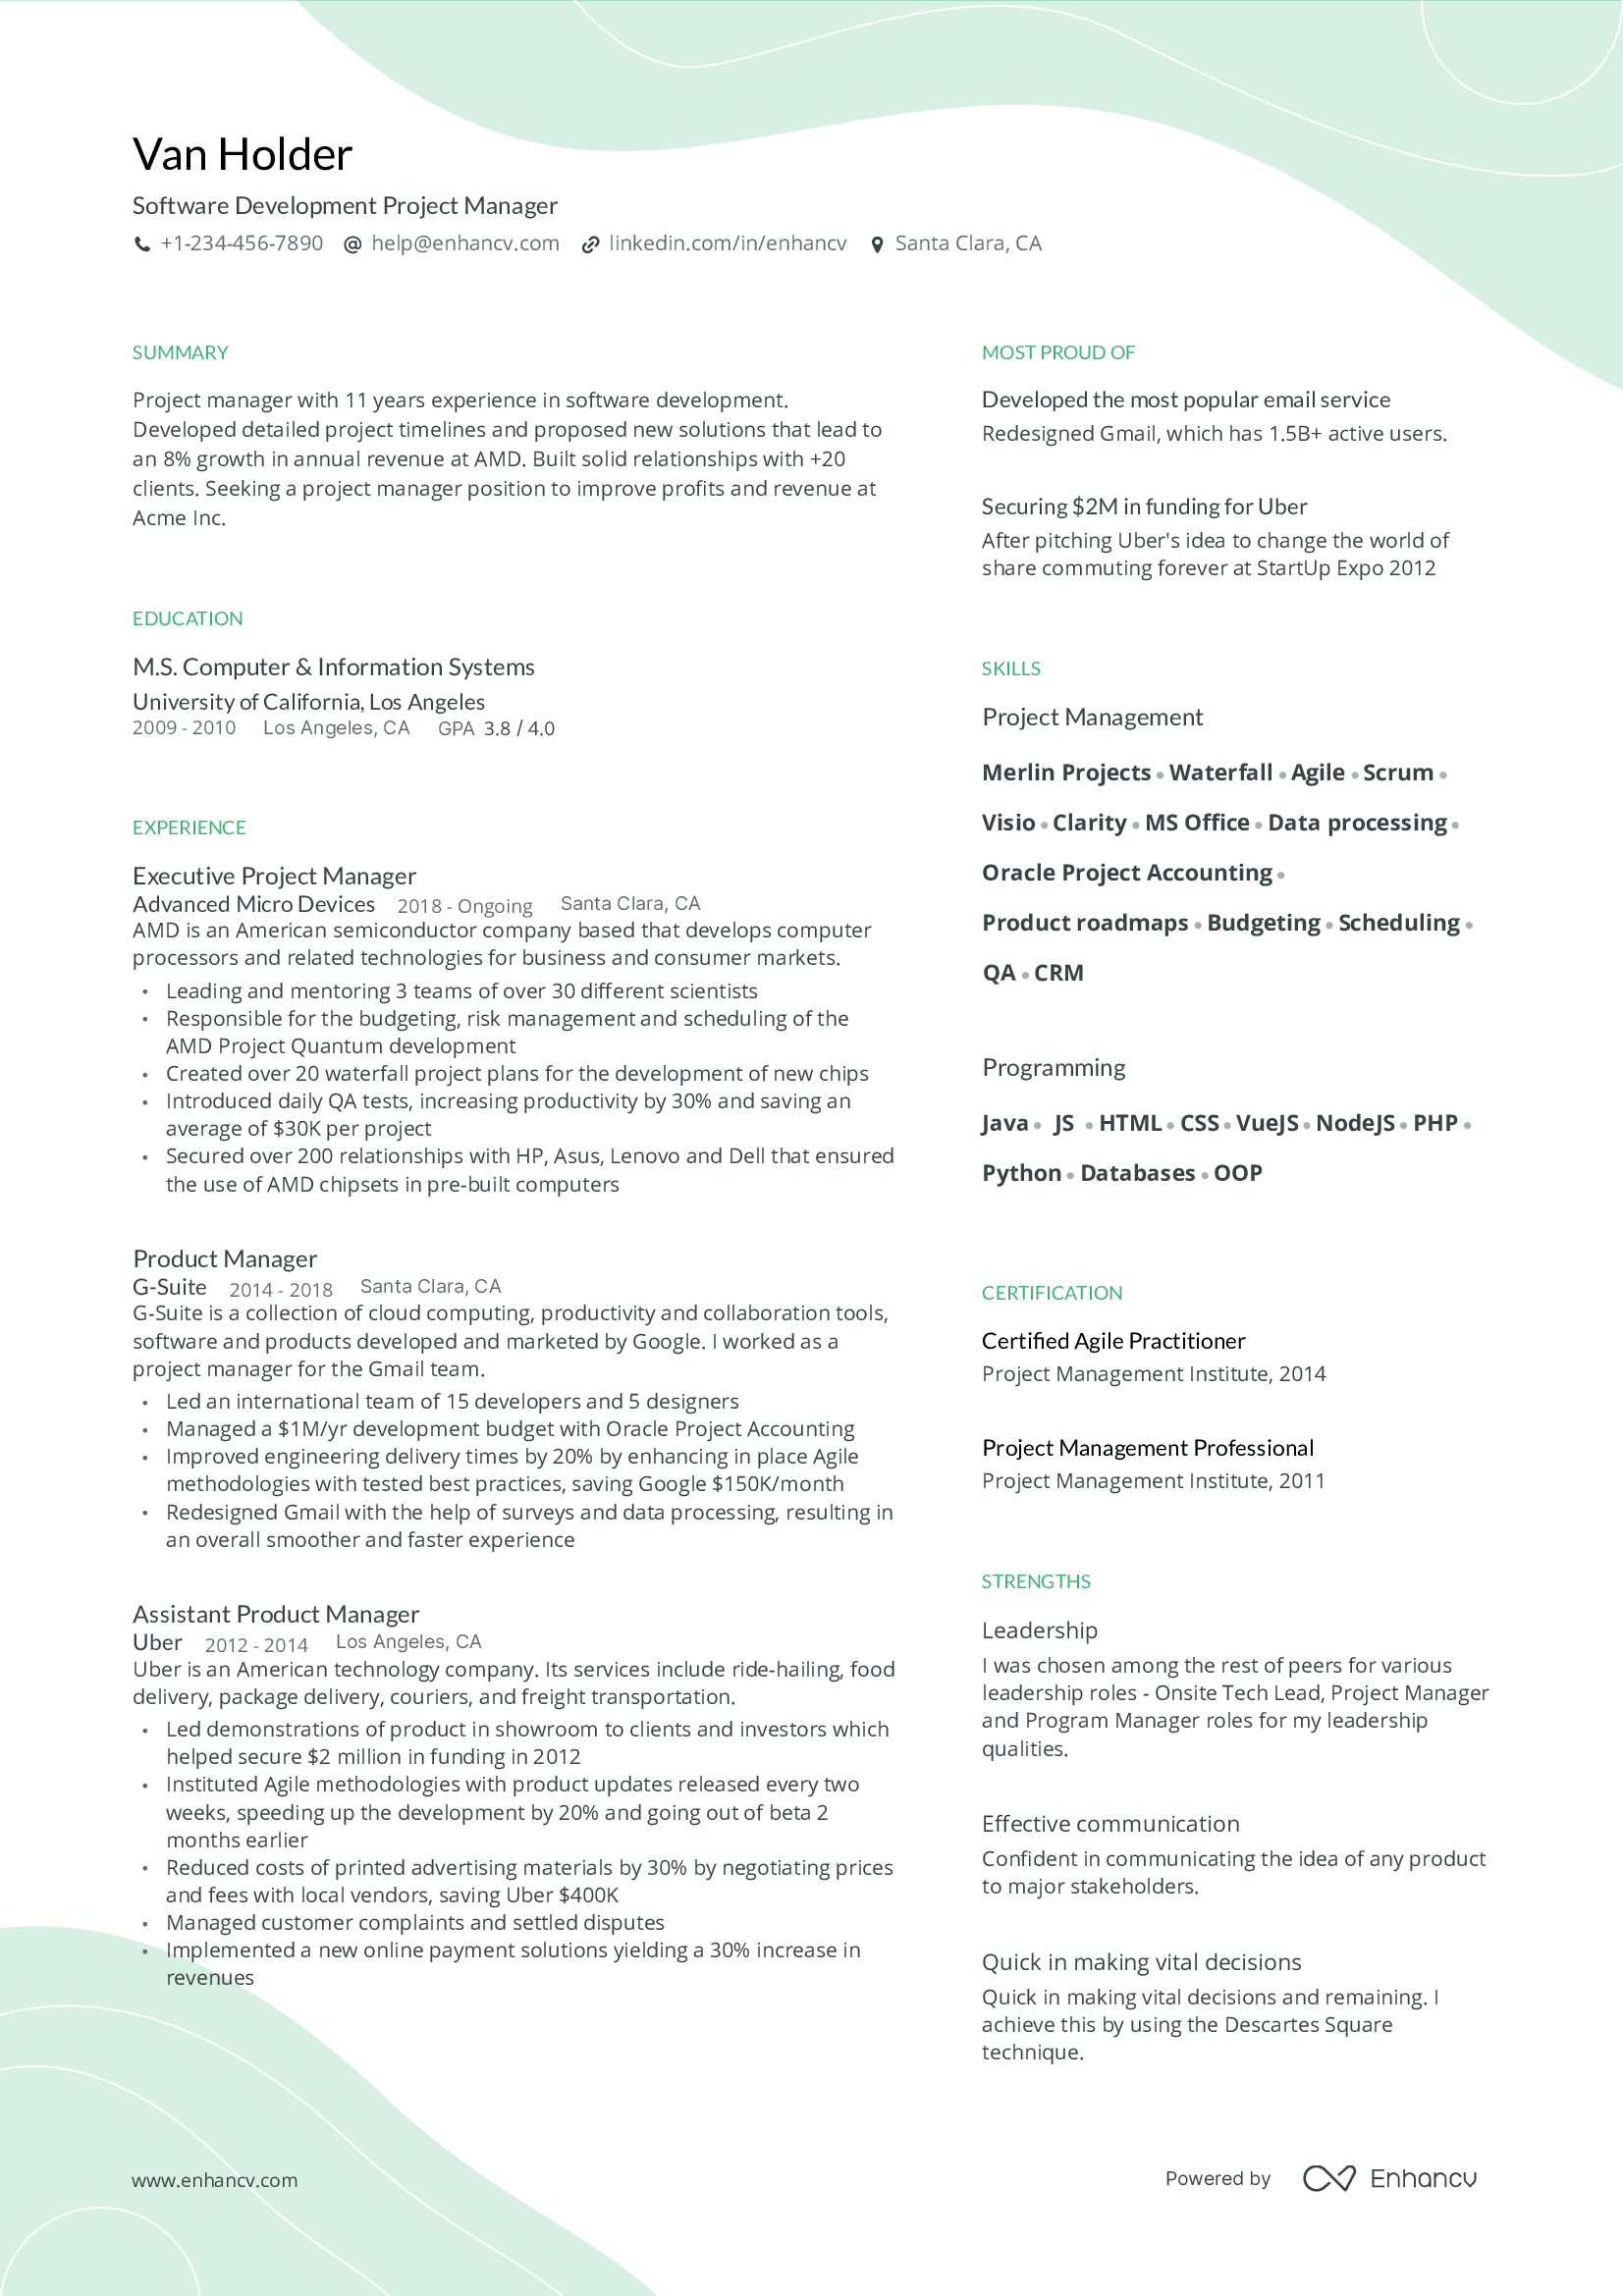 Software Development Project Manager Resume Example.png